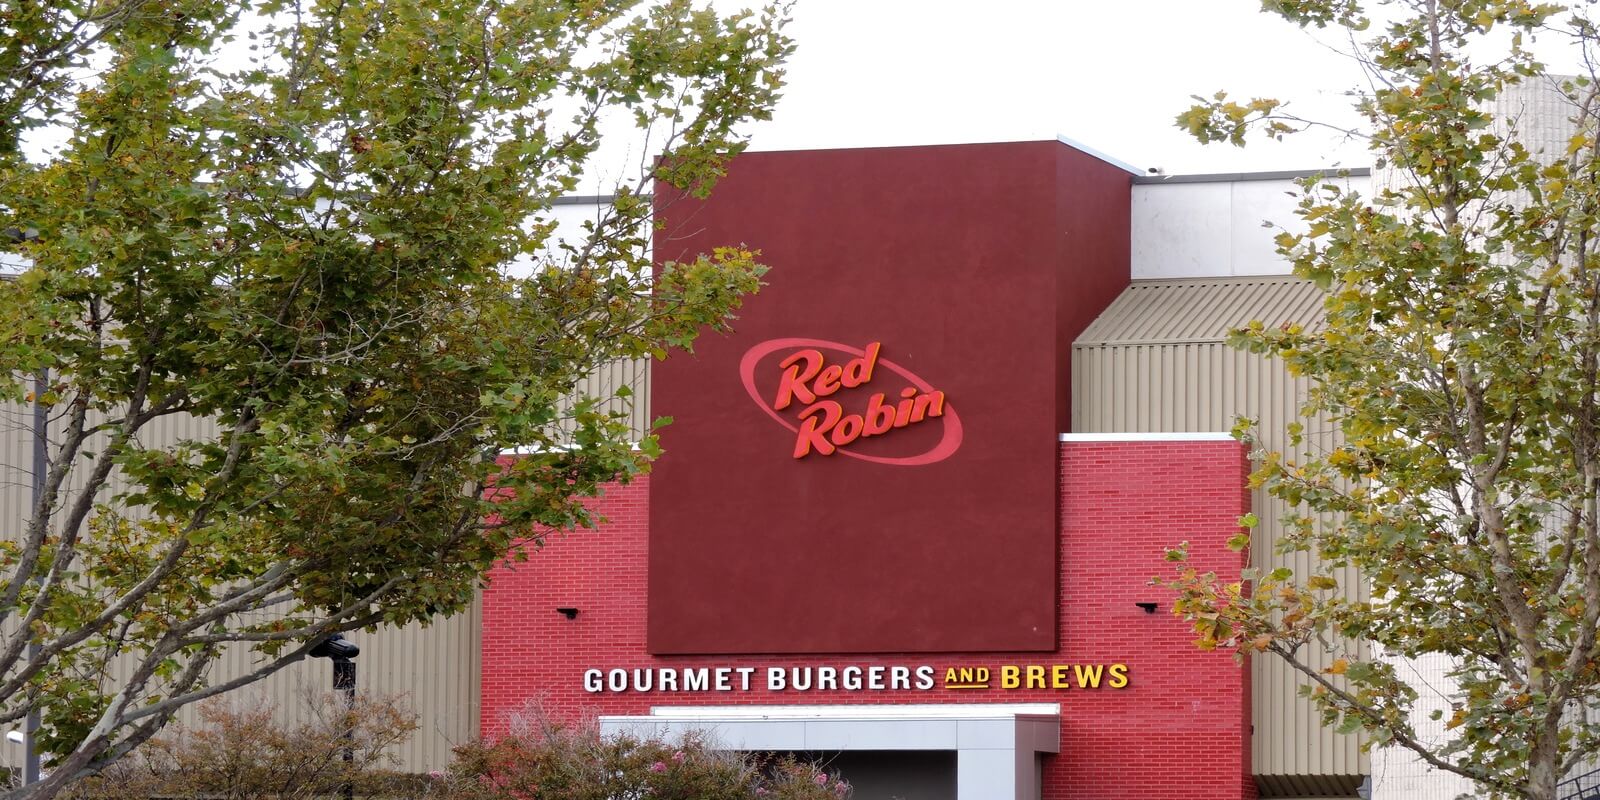 Image of Red Robin Gourmet Burgers